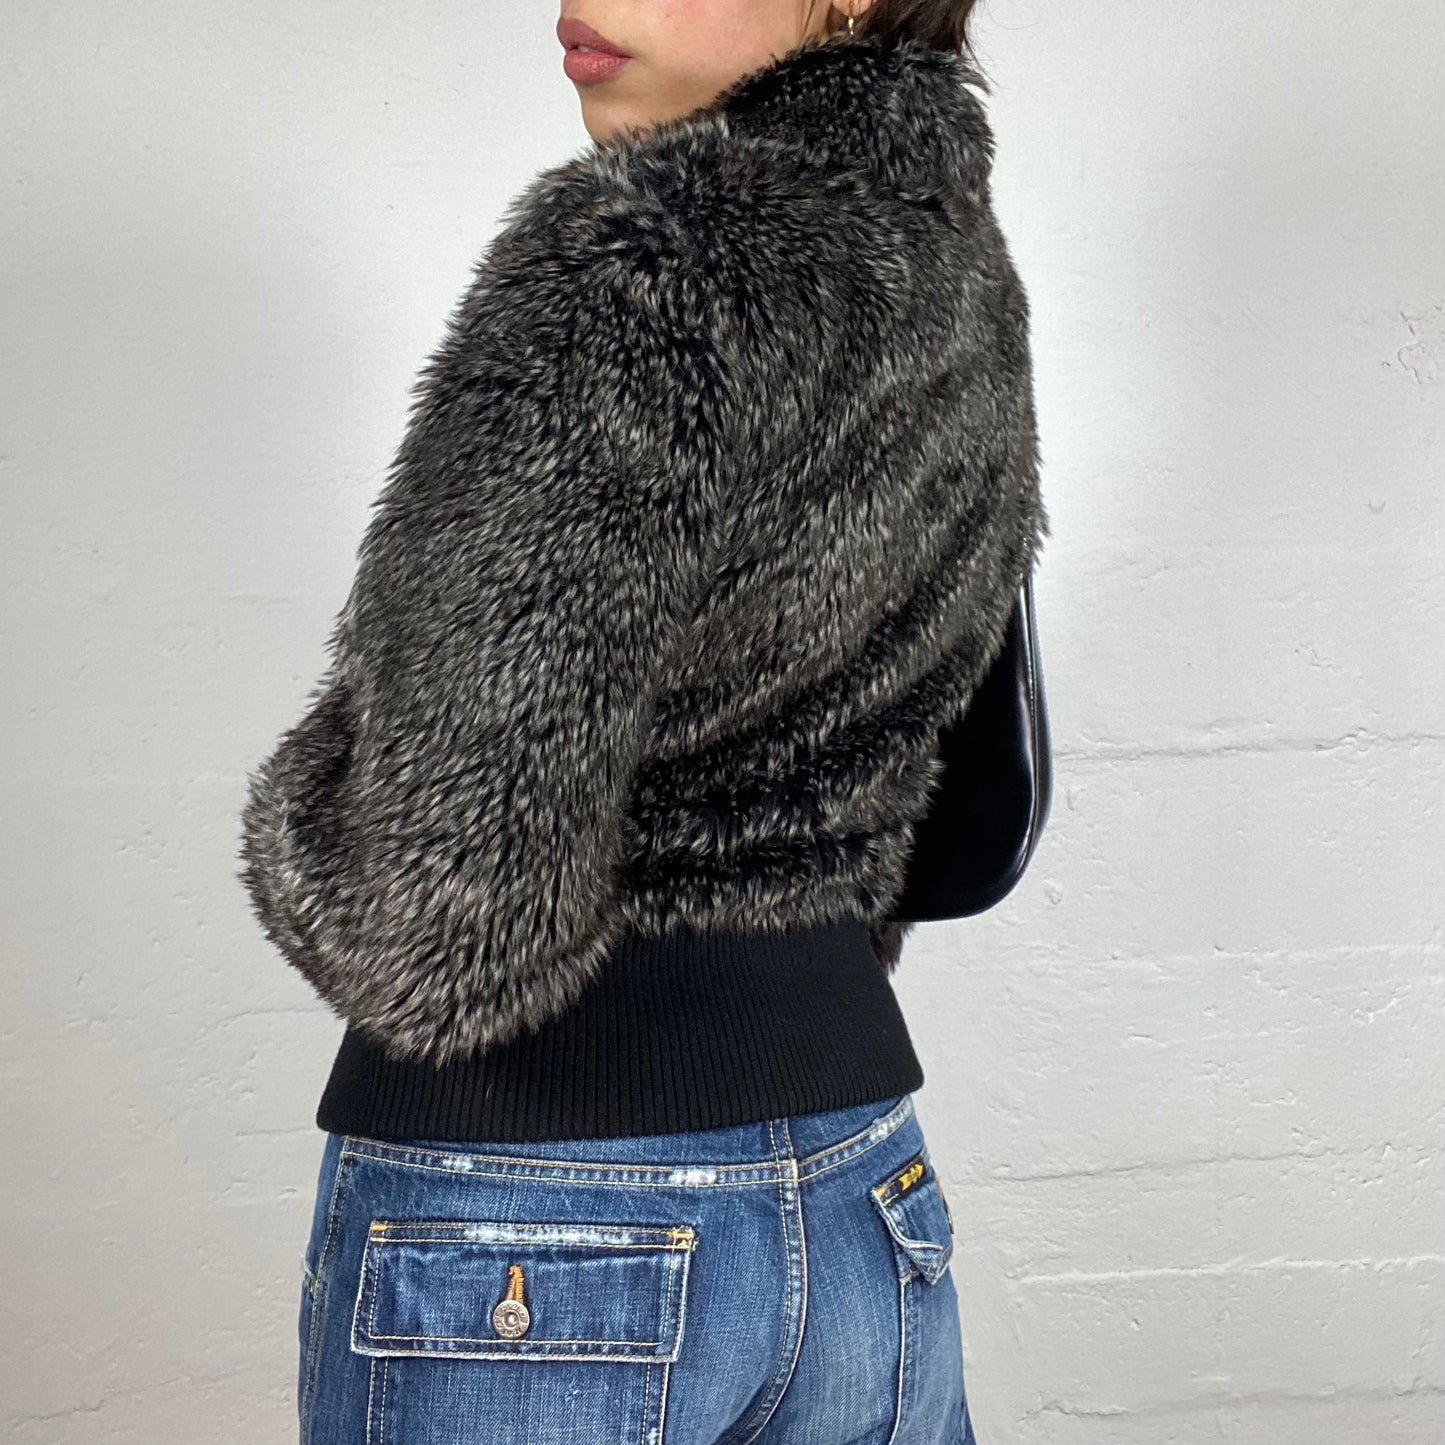 Vintage 2000's Downtown Girl Fur Grey Bomber Jacket with Leather Trims (M)